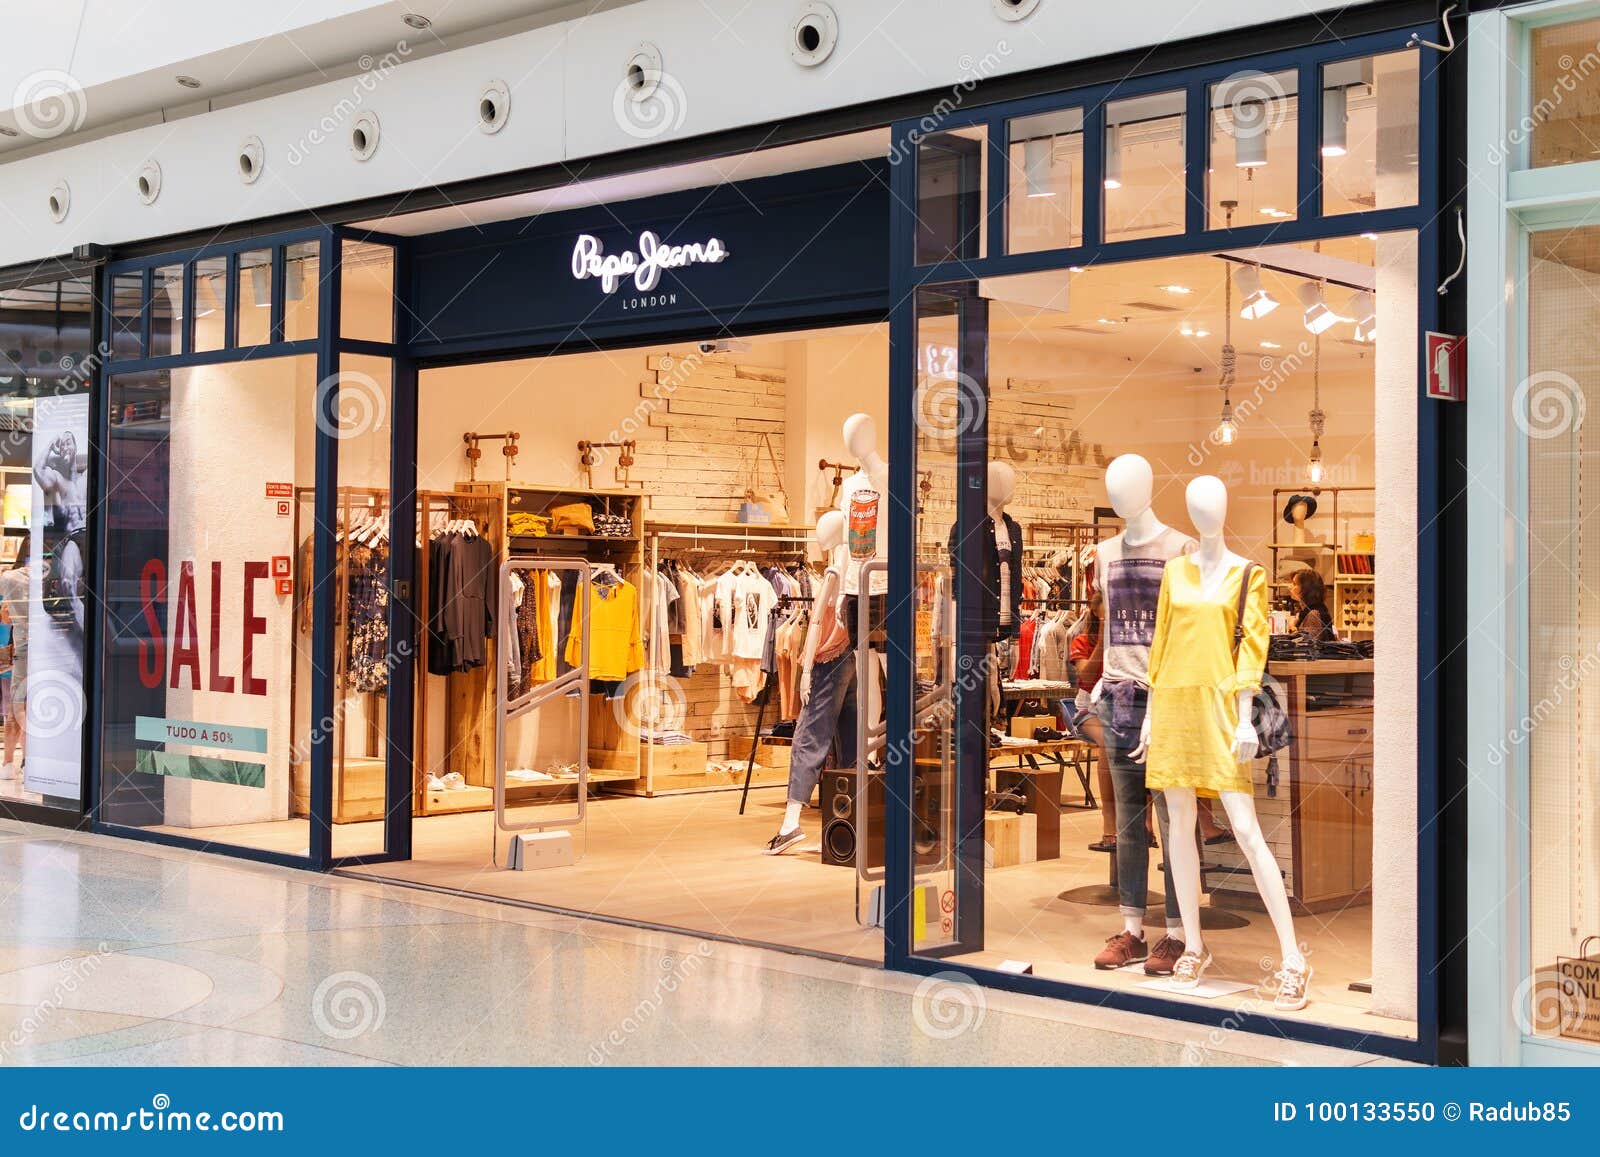 slow The Hotel midnight Pepe Jeans Store editorial image. Image of jeans, inside - 100133550